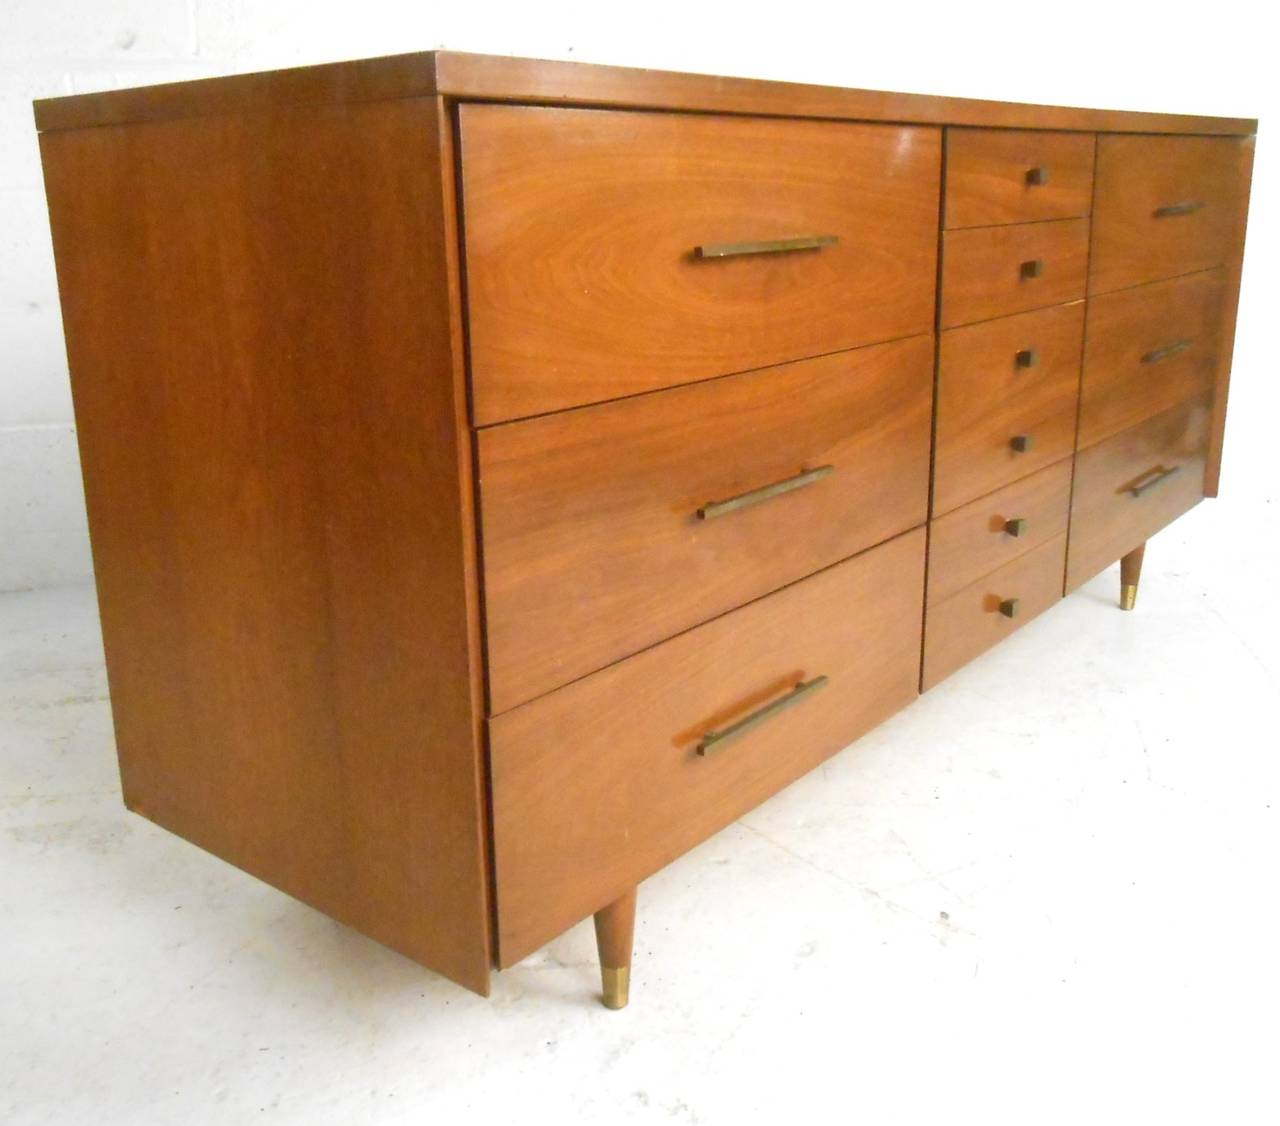 This wonderful vintage dresser features charming brass pulls, tapered legs, and quality Mid-Century construction. Original John Stuart badge still affixed, this lovely piece is the perfect combination of style and storage for any interior. Please